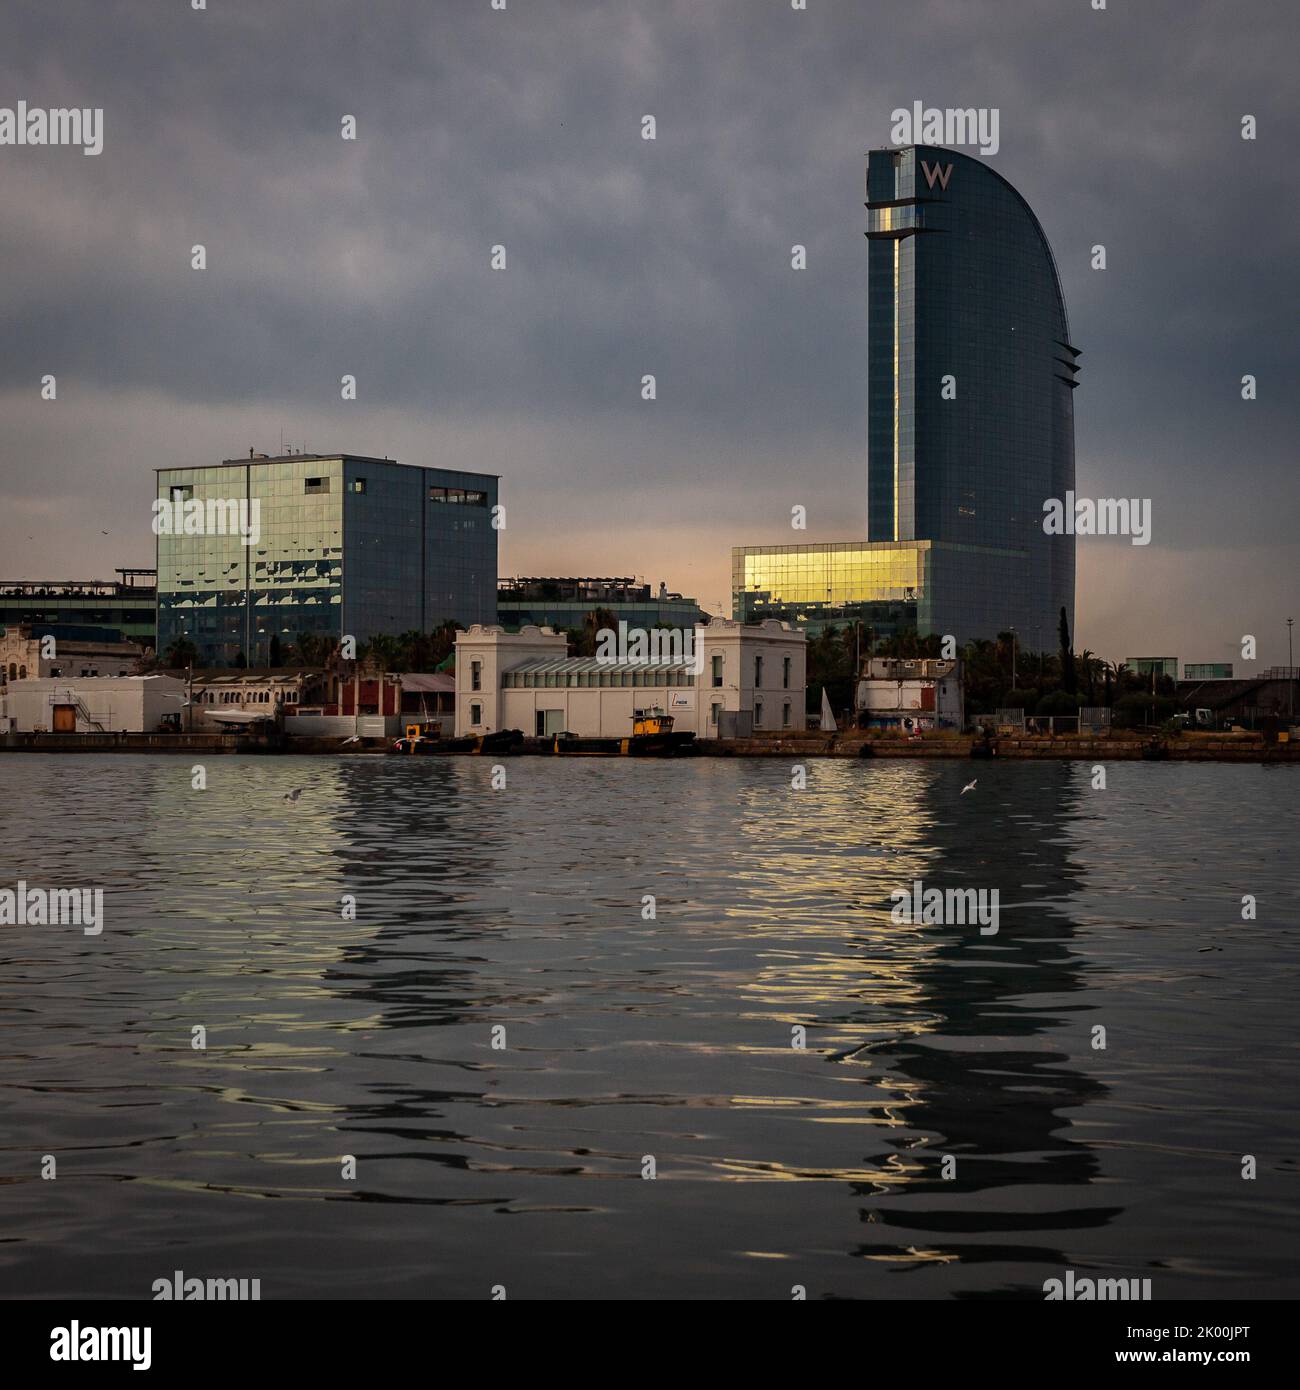 W Hotel (also known as Hotel Vela) designed by Ricard Bofill i Leví, seen from Barcelona's Port Vell Stock Photo